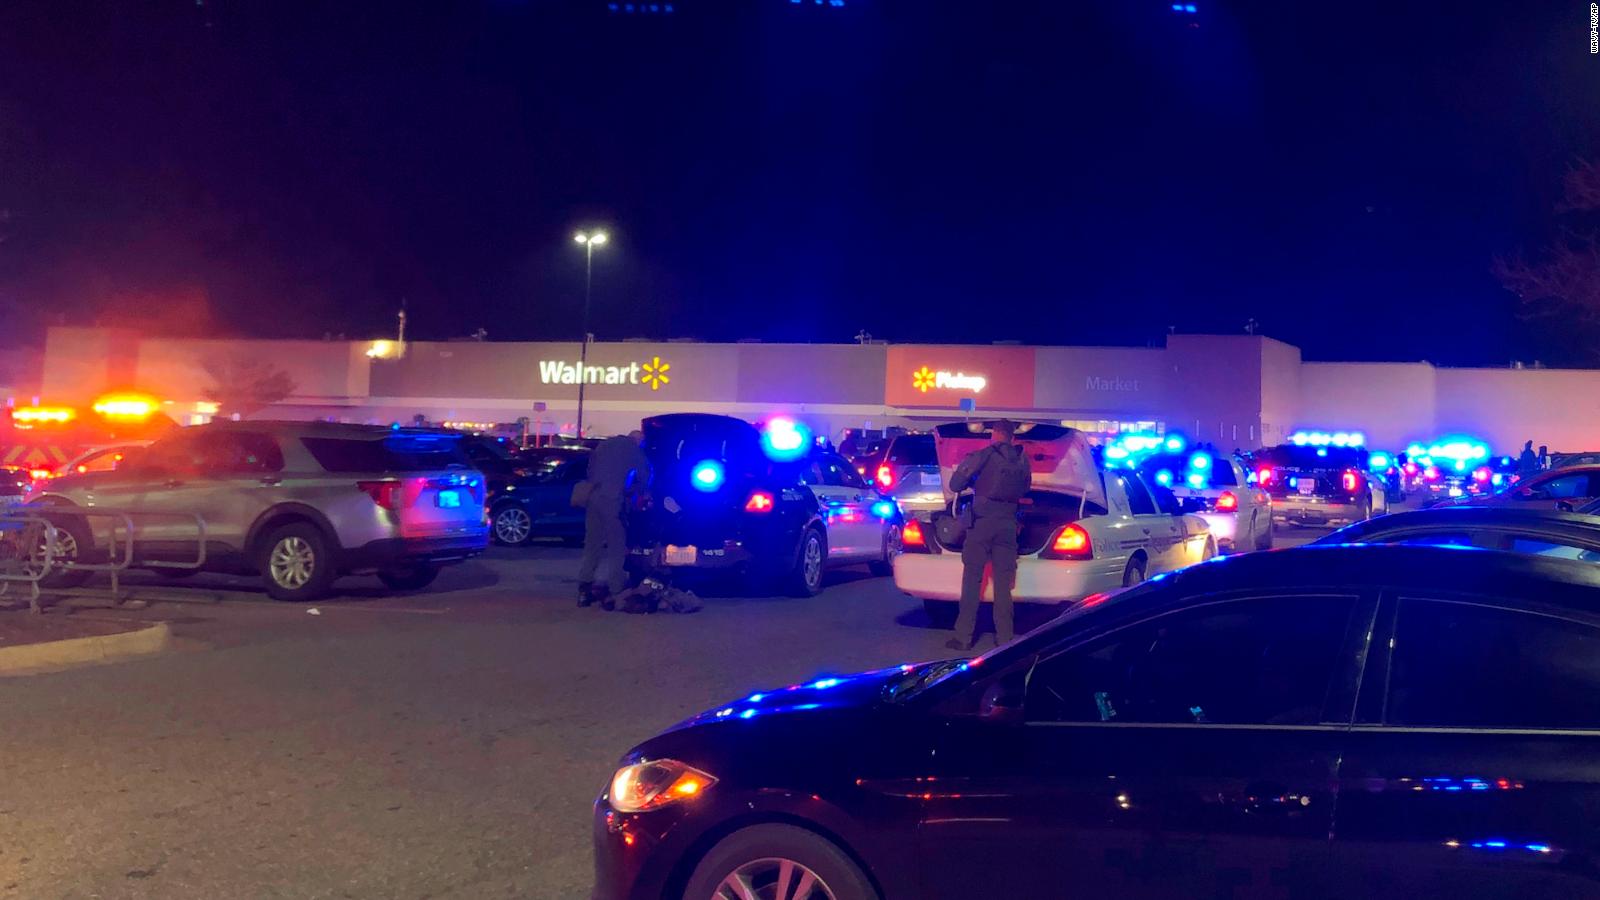 The shooting in Chesapeake, Virginia, leaves many victims, police said